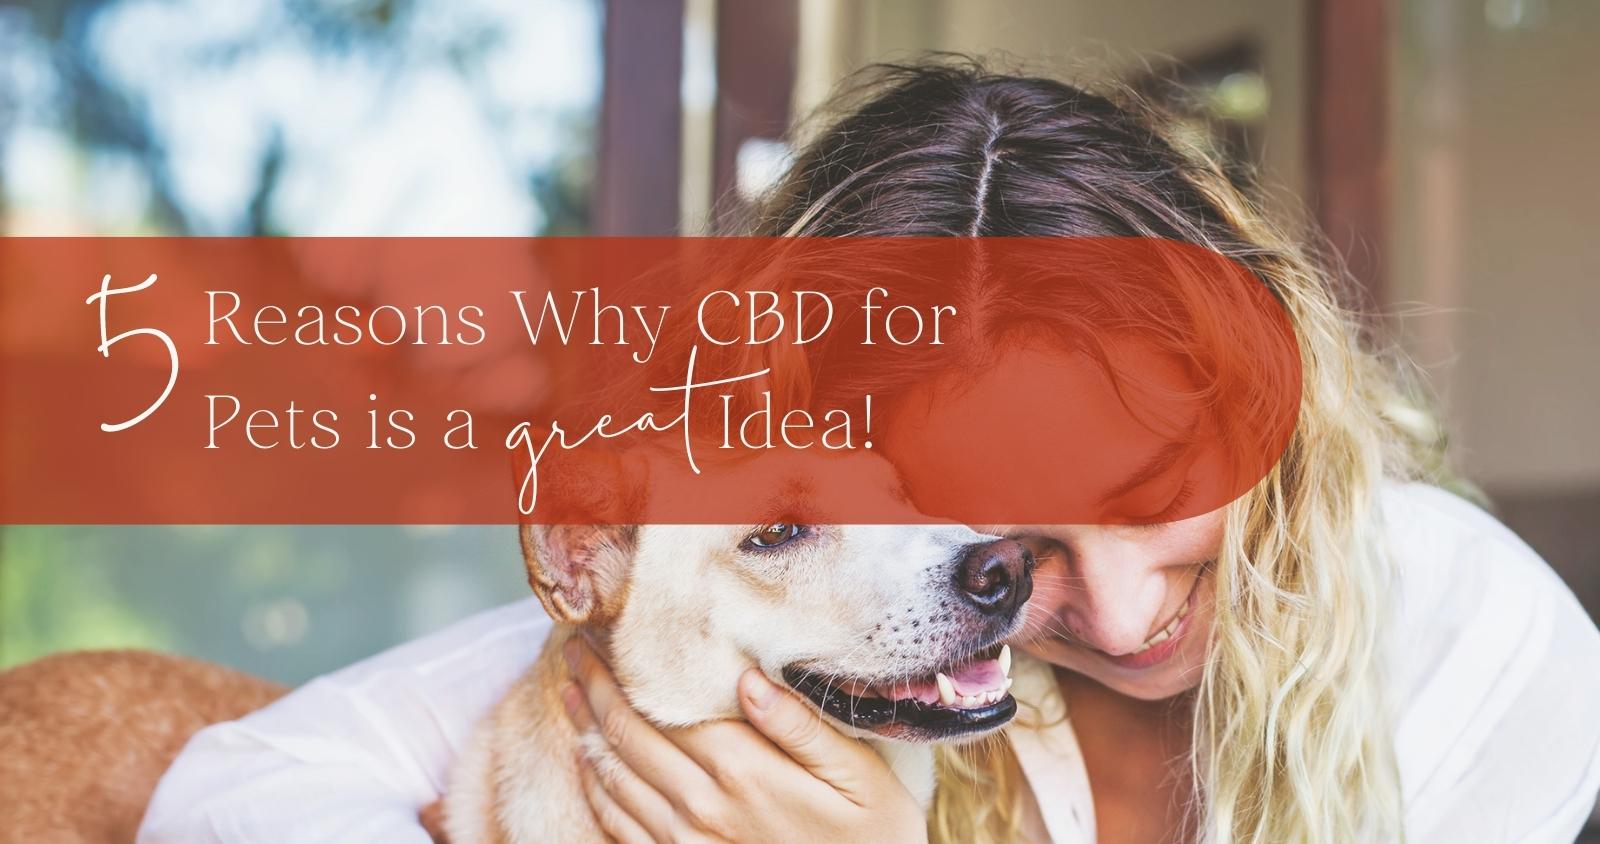 CBD for Pets is a Great Idea 9 22 22